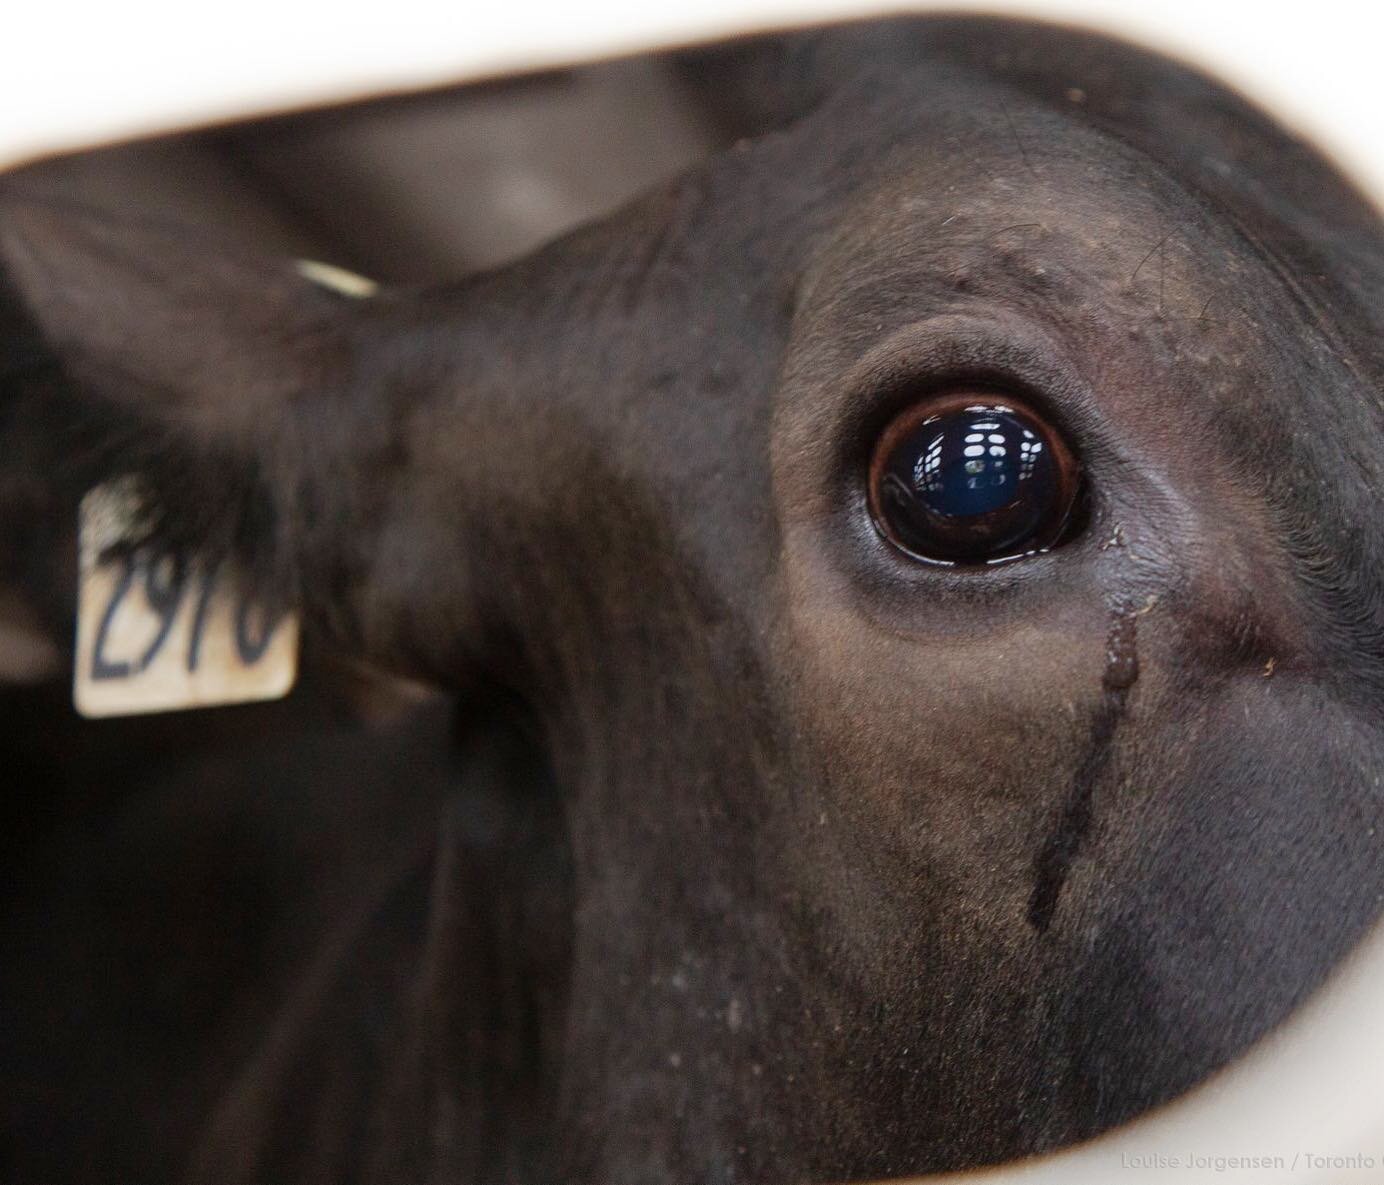 Our planet. Theirs too.

A cow used for her breast milk is killed at a fraction of her natural lifespan when she can no longer keep up with the impossible and unnatural demands of farmer and dairy consumers. 
📷 Cow at slaughterhouse | @animalsentien